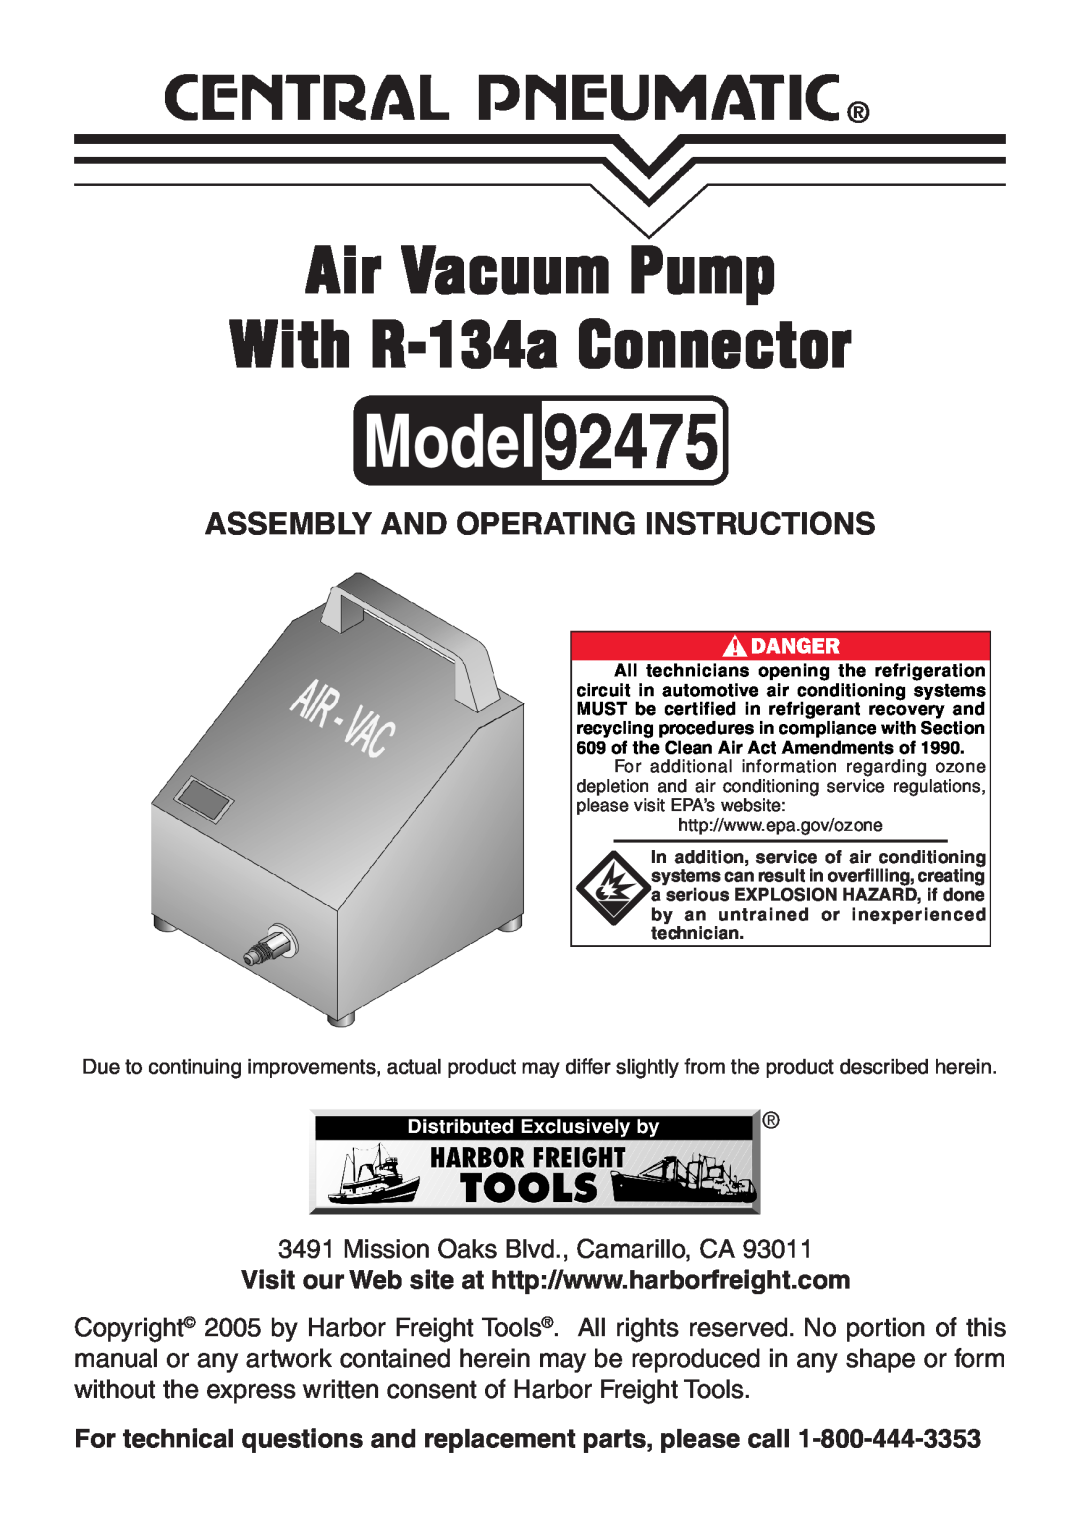 Harbor Freight Tools 92475 manual Assembly And Operating Instructions, Air Vacuum Pump With R-134a Connector 